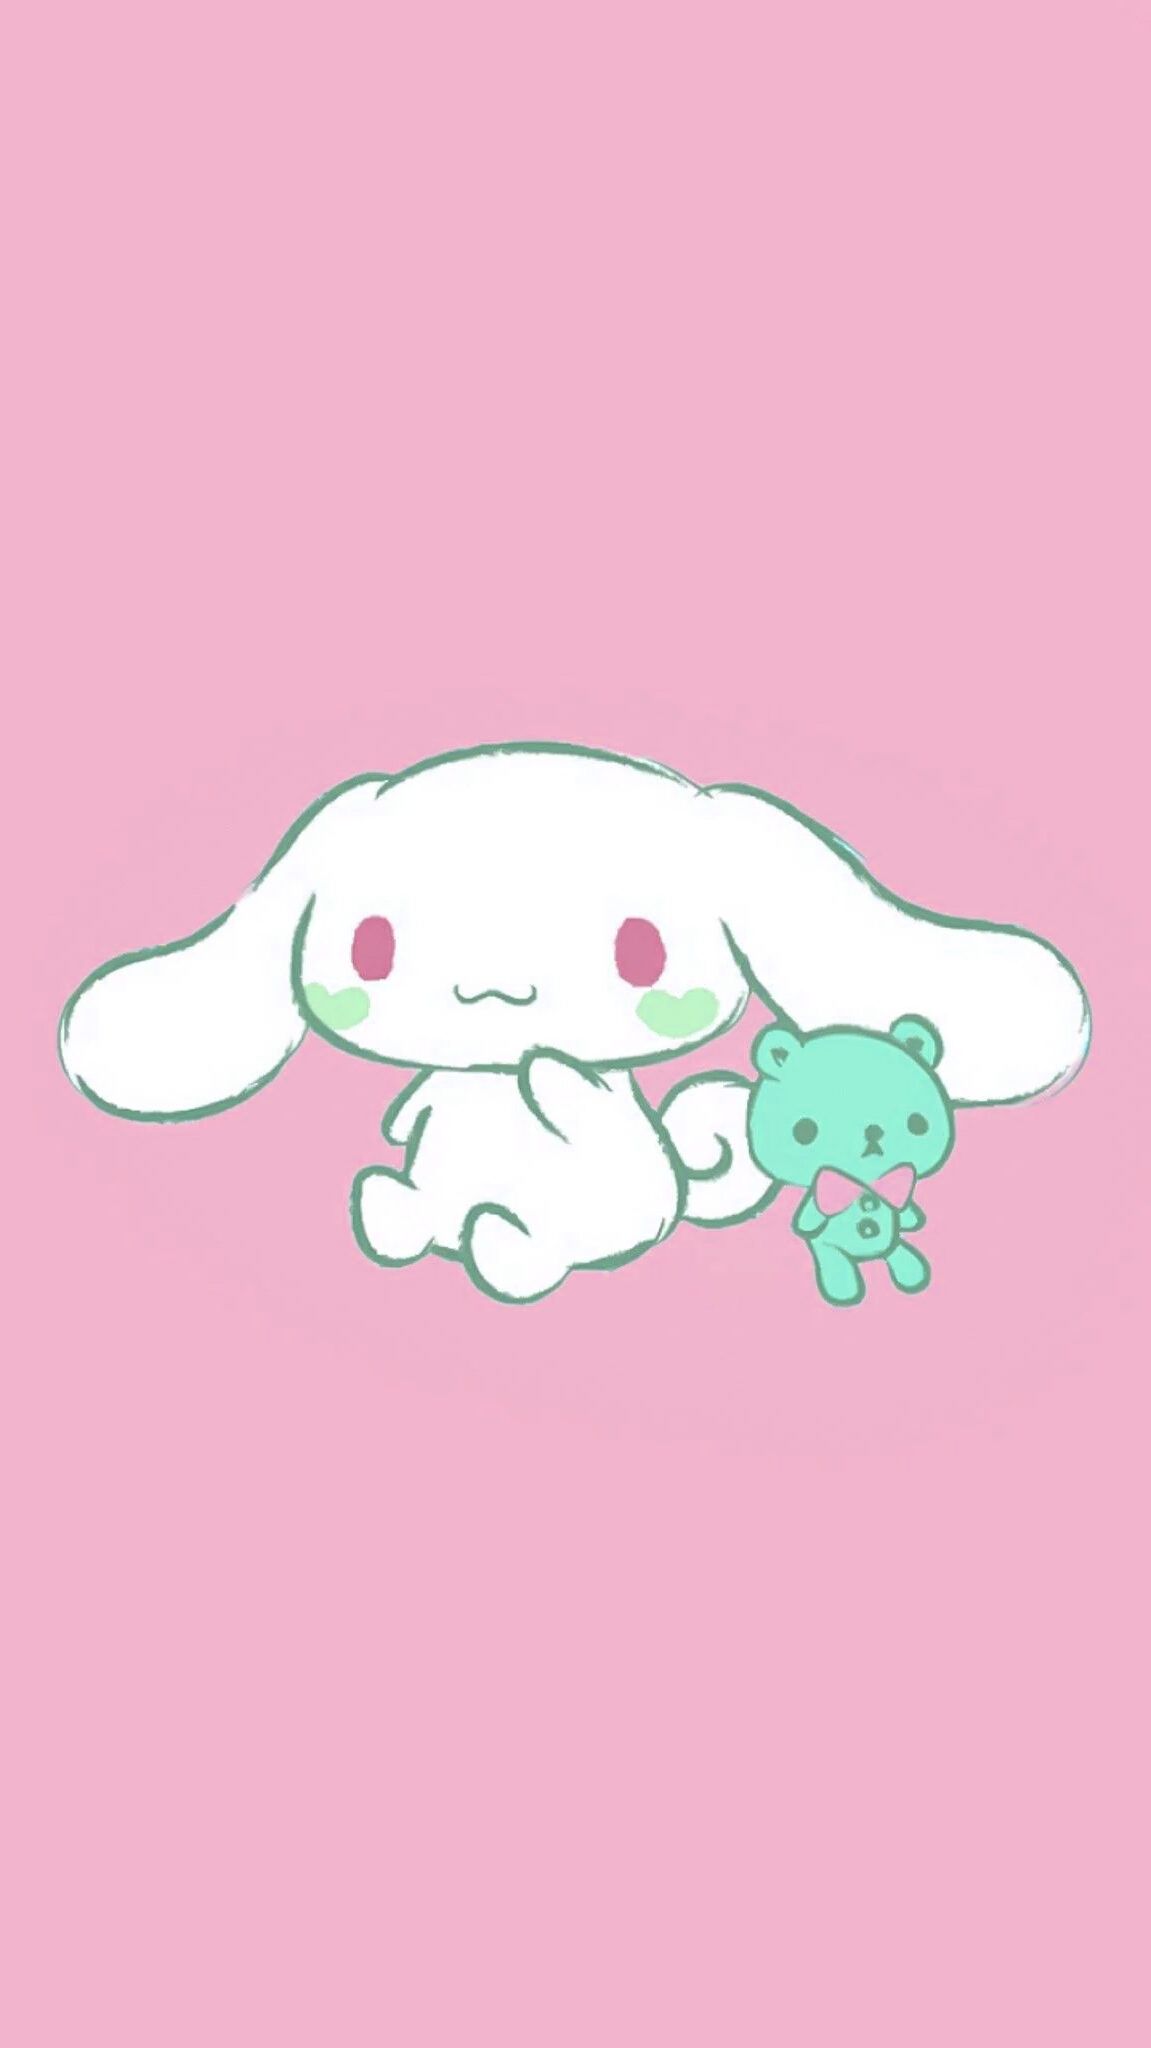 A picture of a white rabbit holding a teddy bear on a pink background - Keroppi